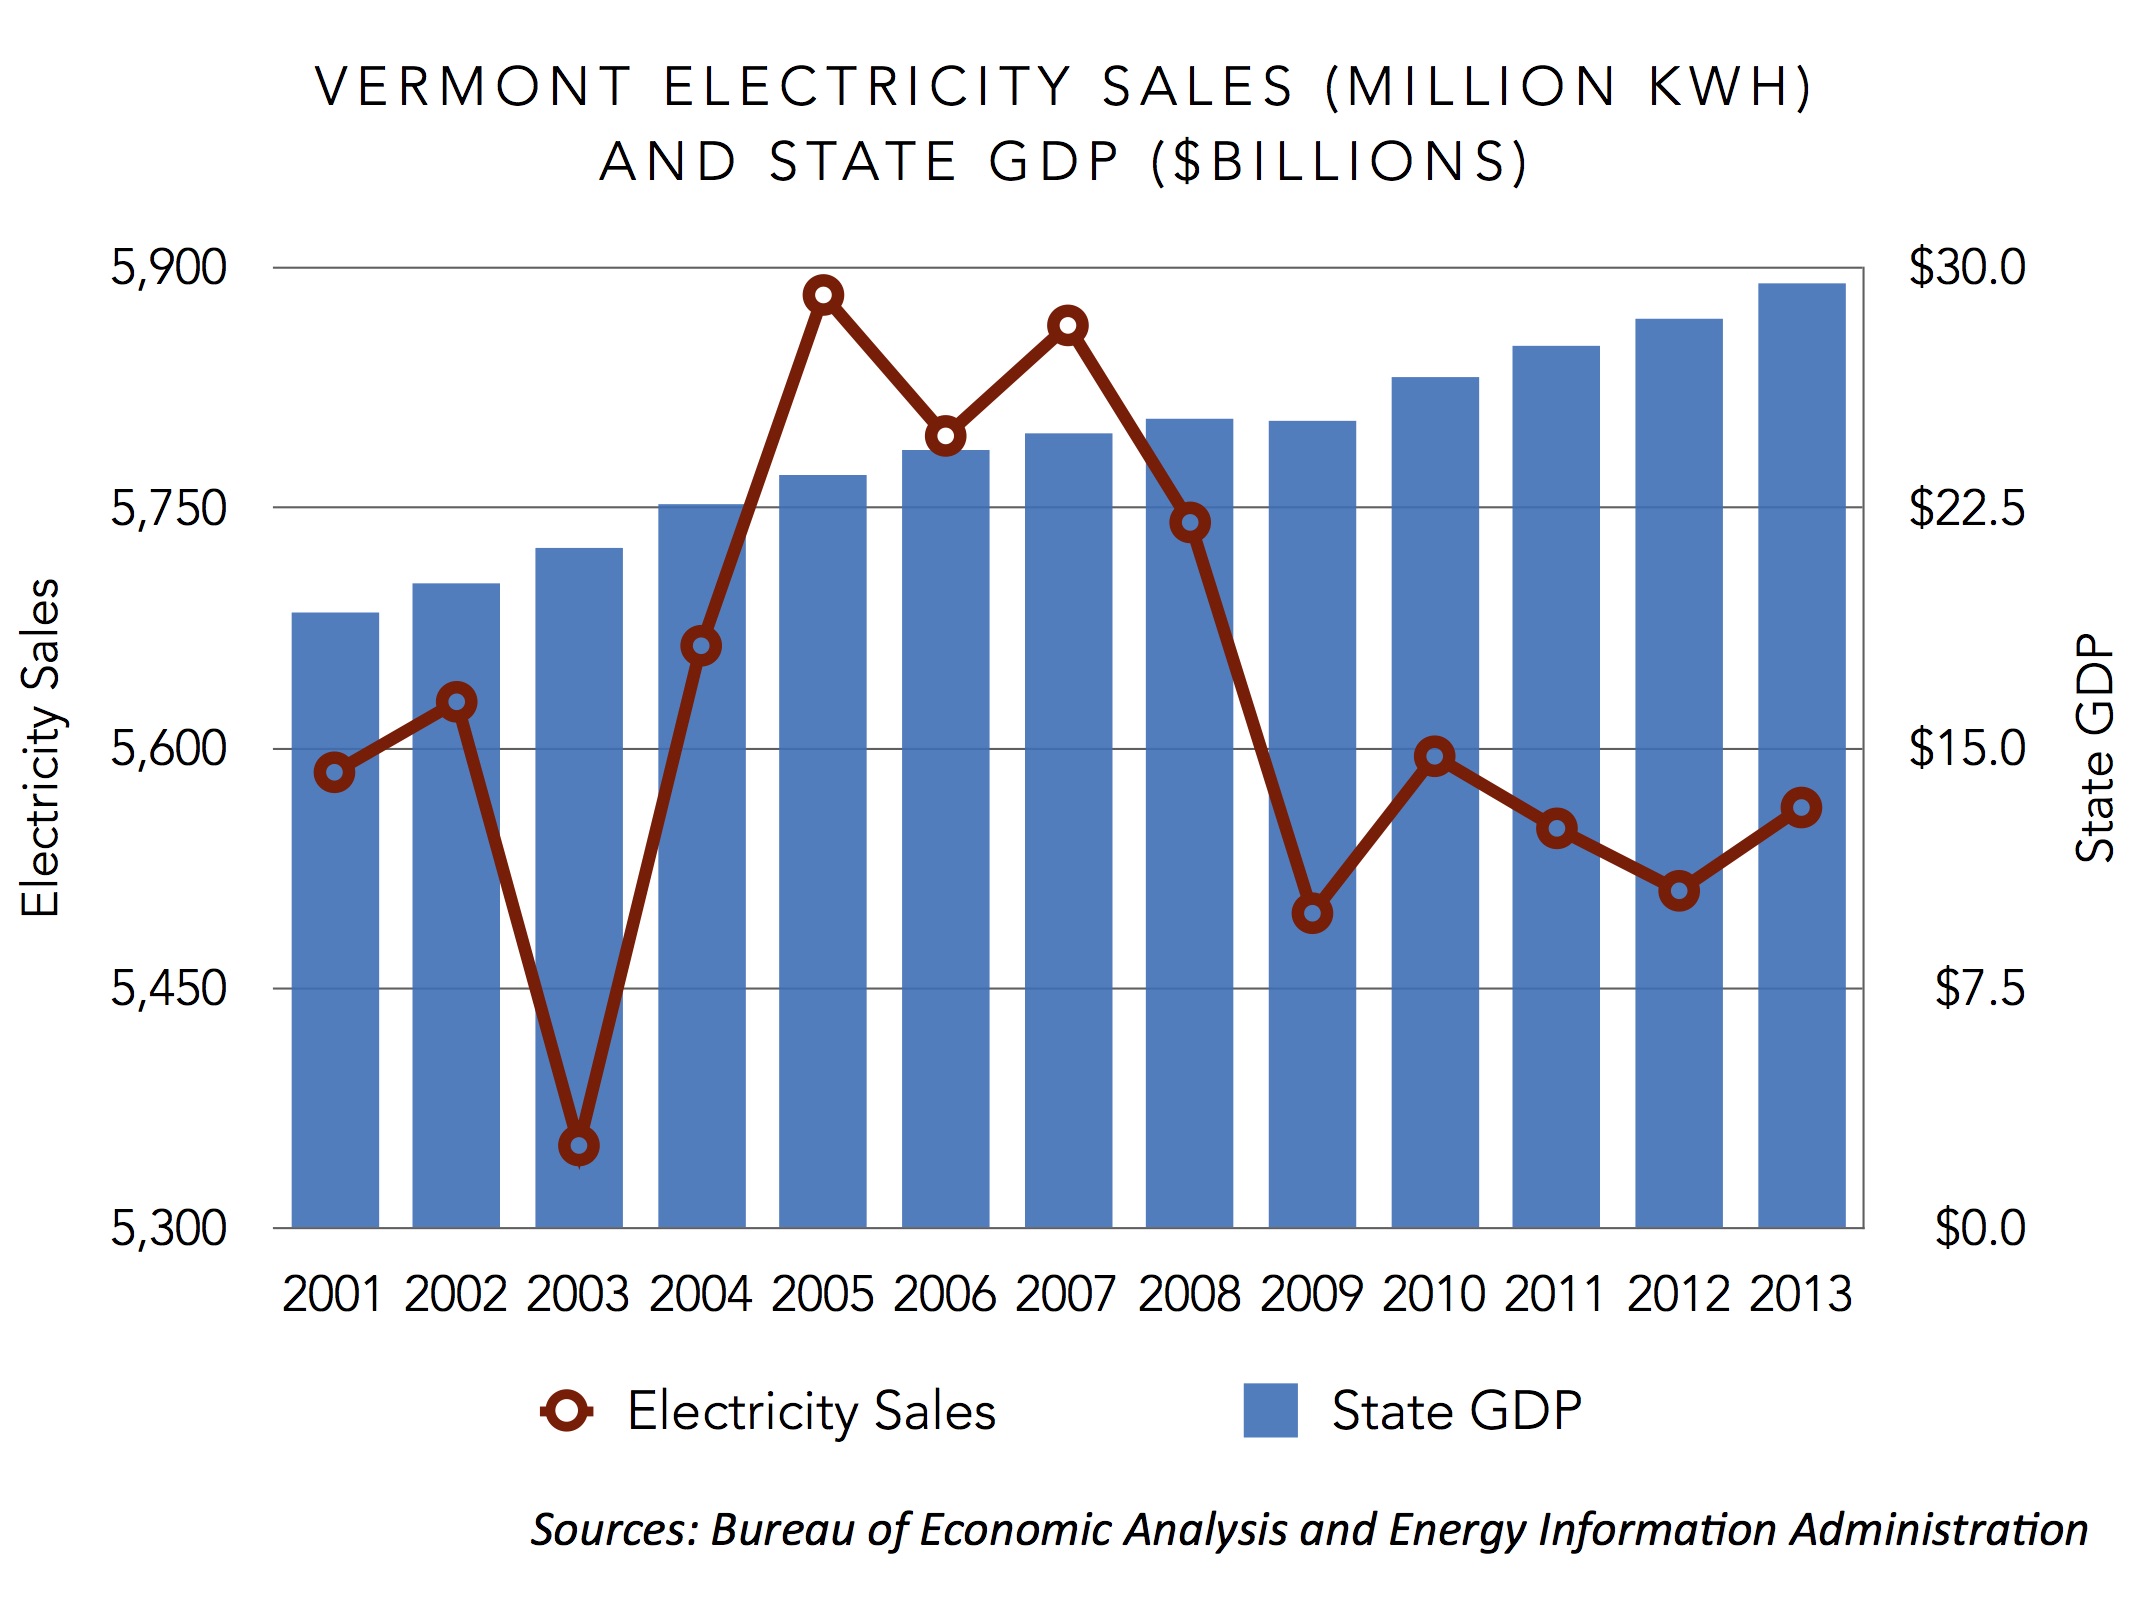 vermont electricity sales and state gdp 2001-2013